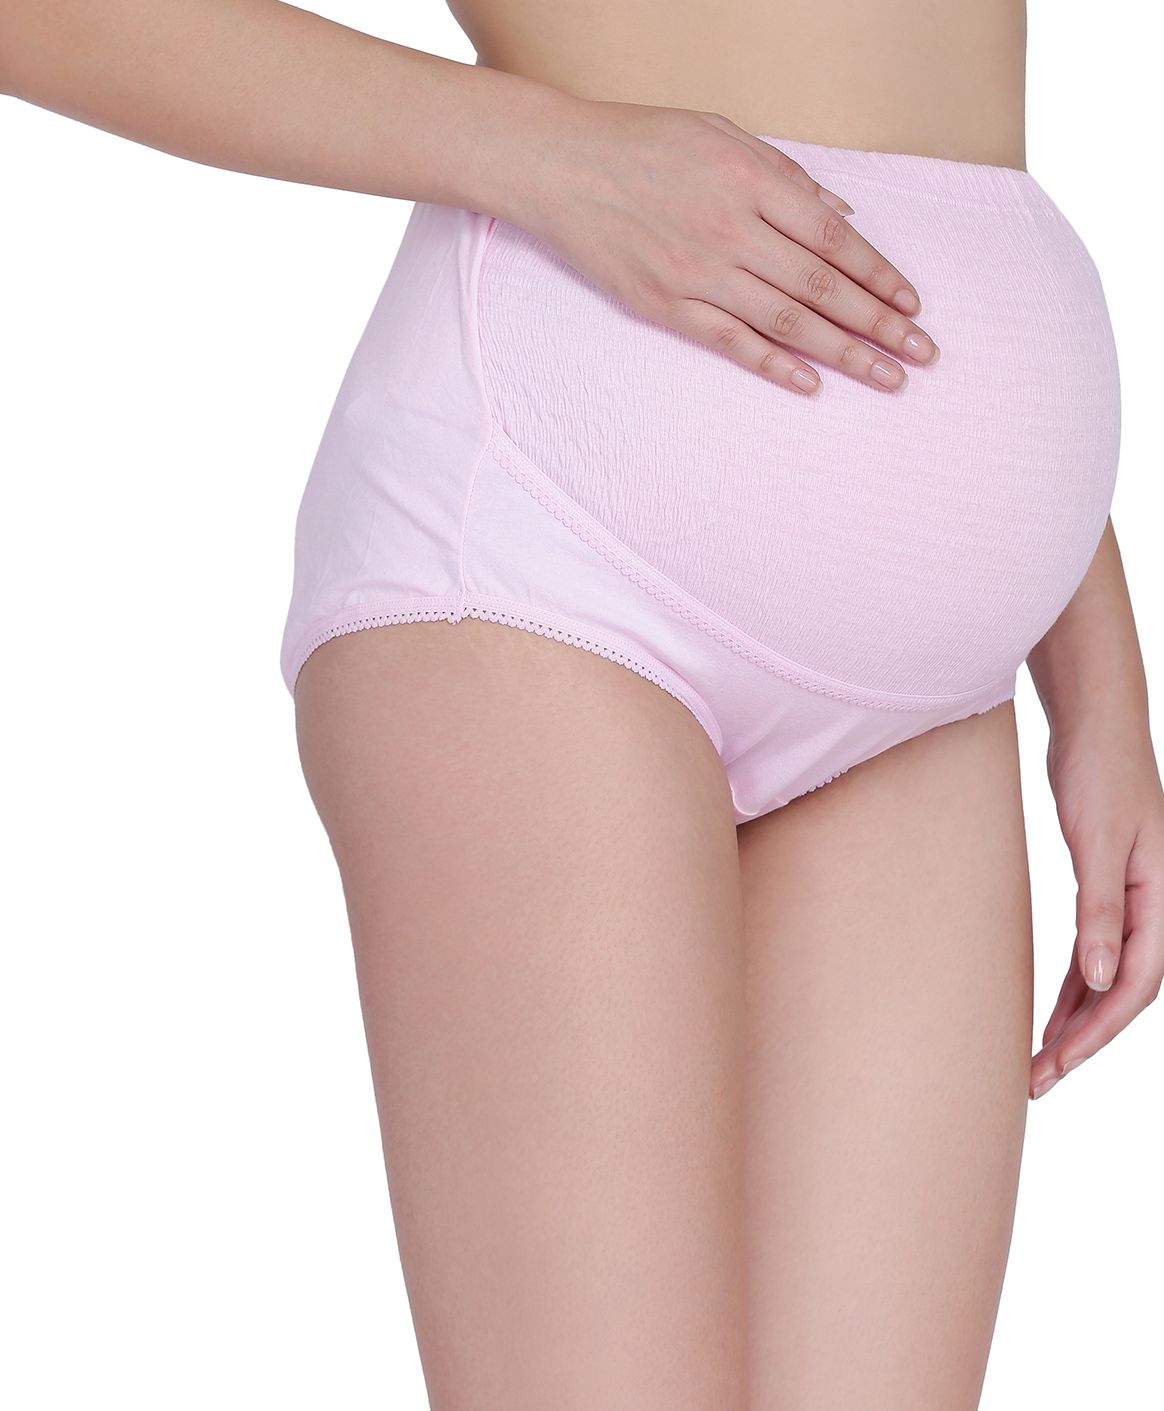 Fashiol Cotton Maternity Underwear High Waist Pregnancy Over Bump Pack of 2  - Pink &amp; Skin Online in India, Buy at Best Price from FirstCry.com - 8243525